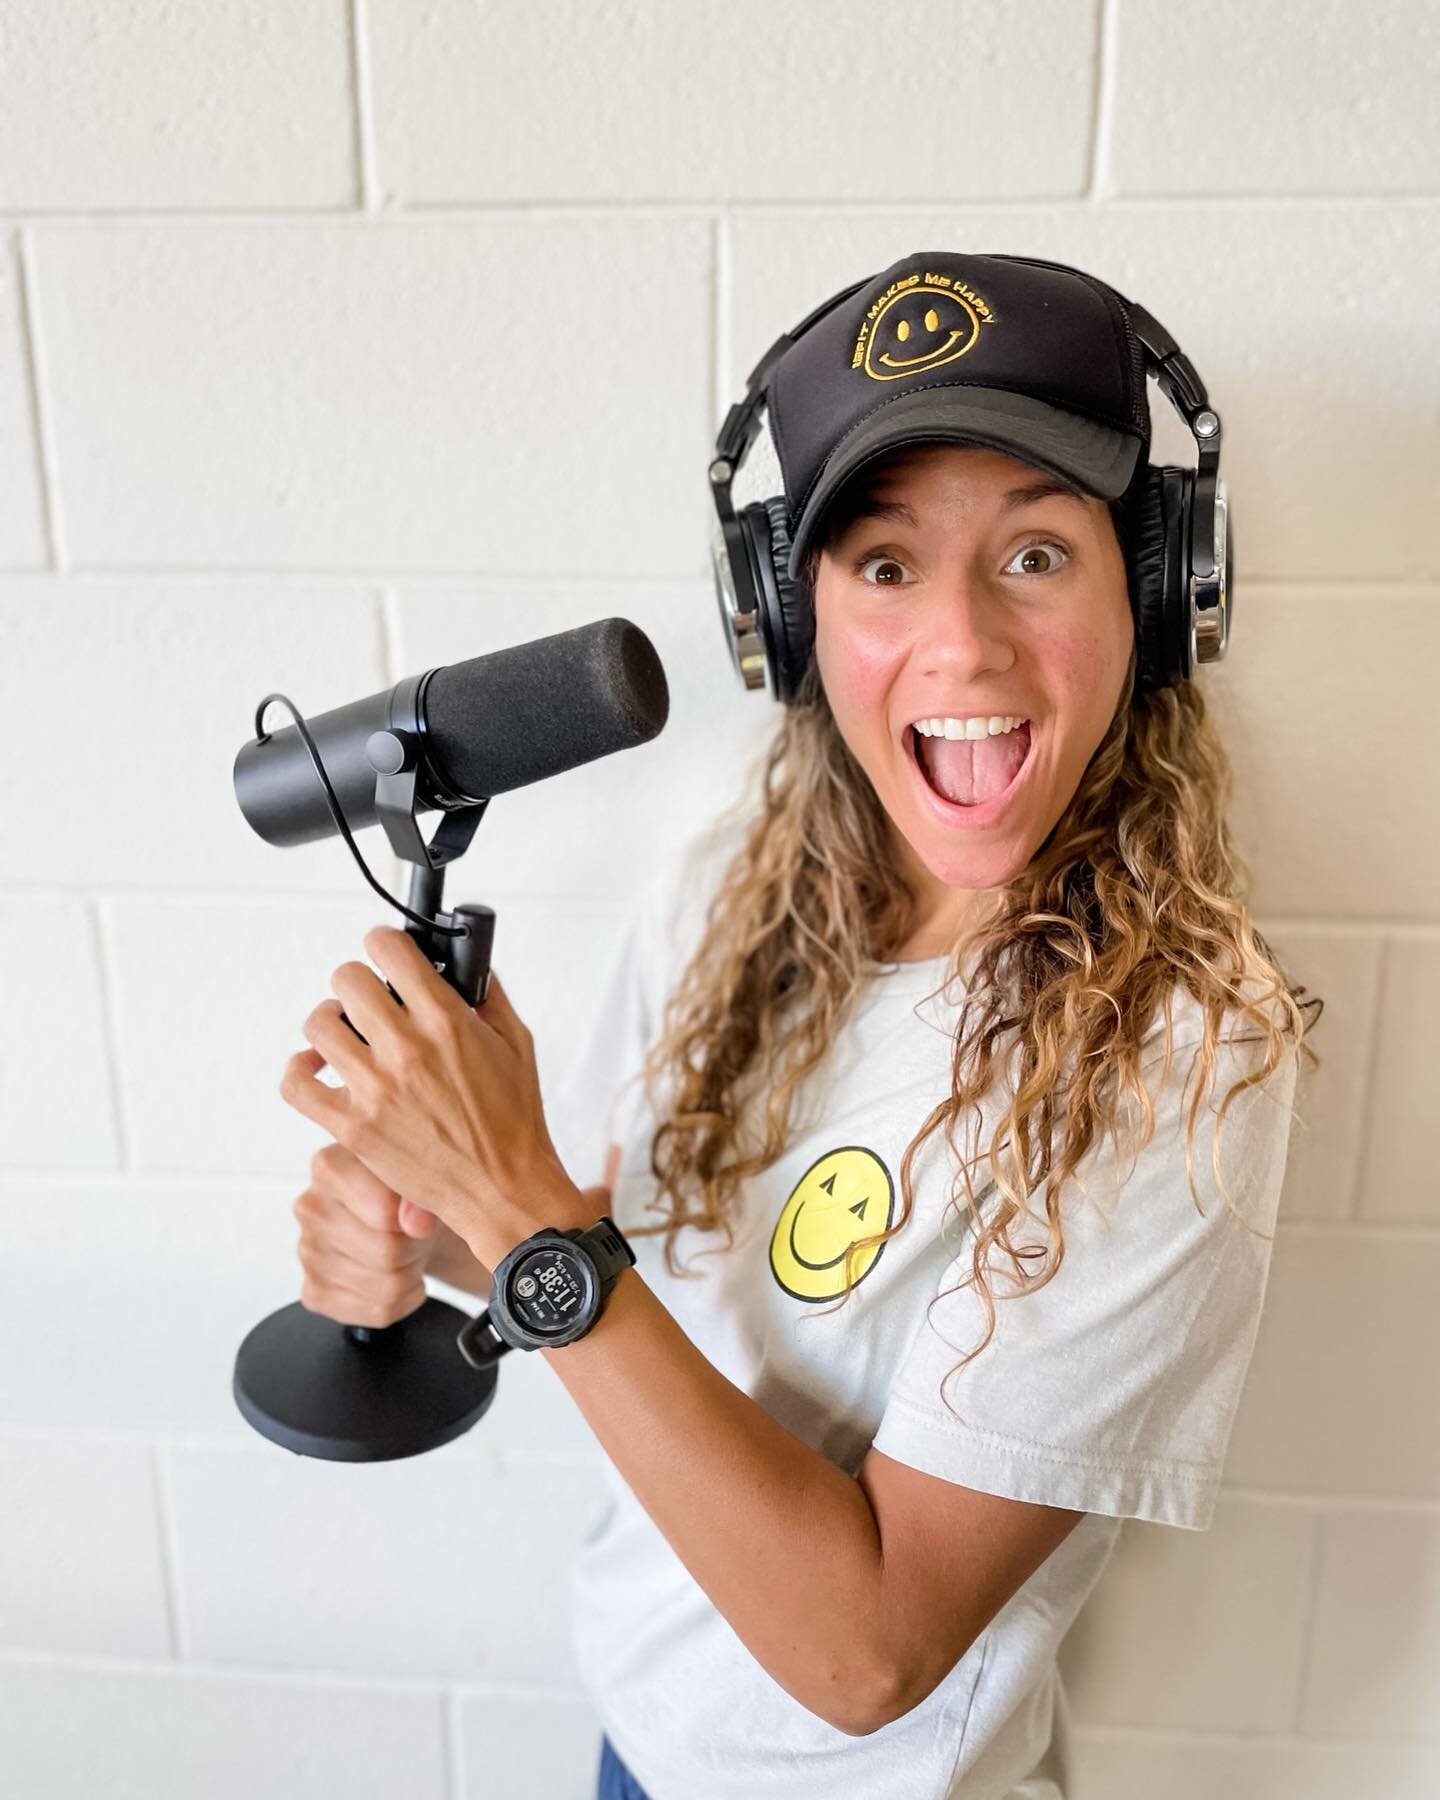 Swipe to see how happy we are to be back behind the mic &amp; releasing ANOTHER NEW EPISODE THIS FRIDAY! 🤩✨

Head on over to Apple Podcasts (or wherever you listen to the podcast) and SUBSCRIBE so you can be notified as soon as this new episode is r